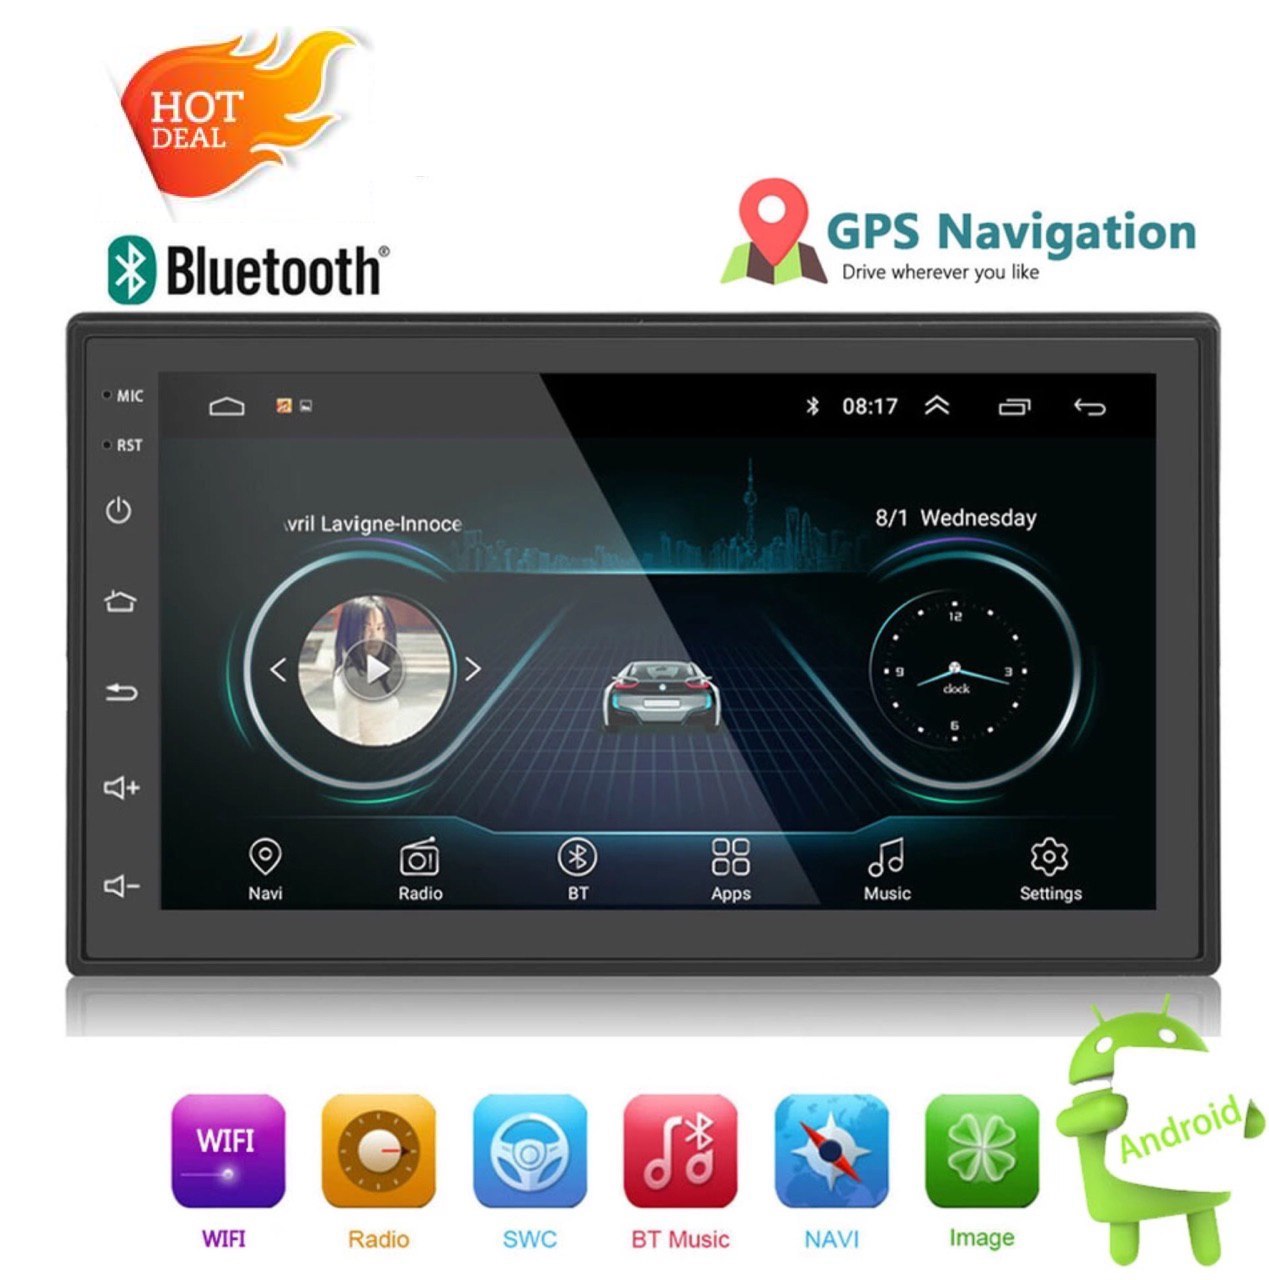 Car Stereo 2 DIN 7” MP5 Player with GPS Navigation, Bluetooth, USB, Android 8.1